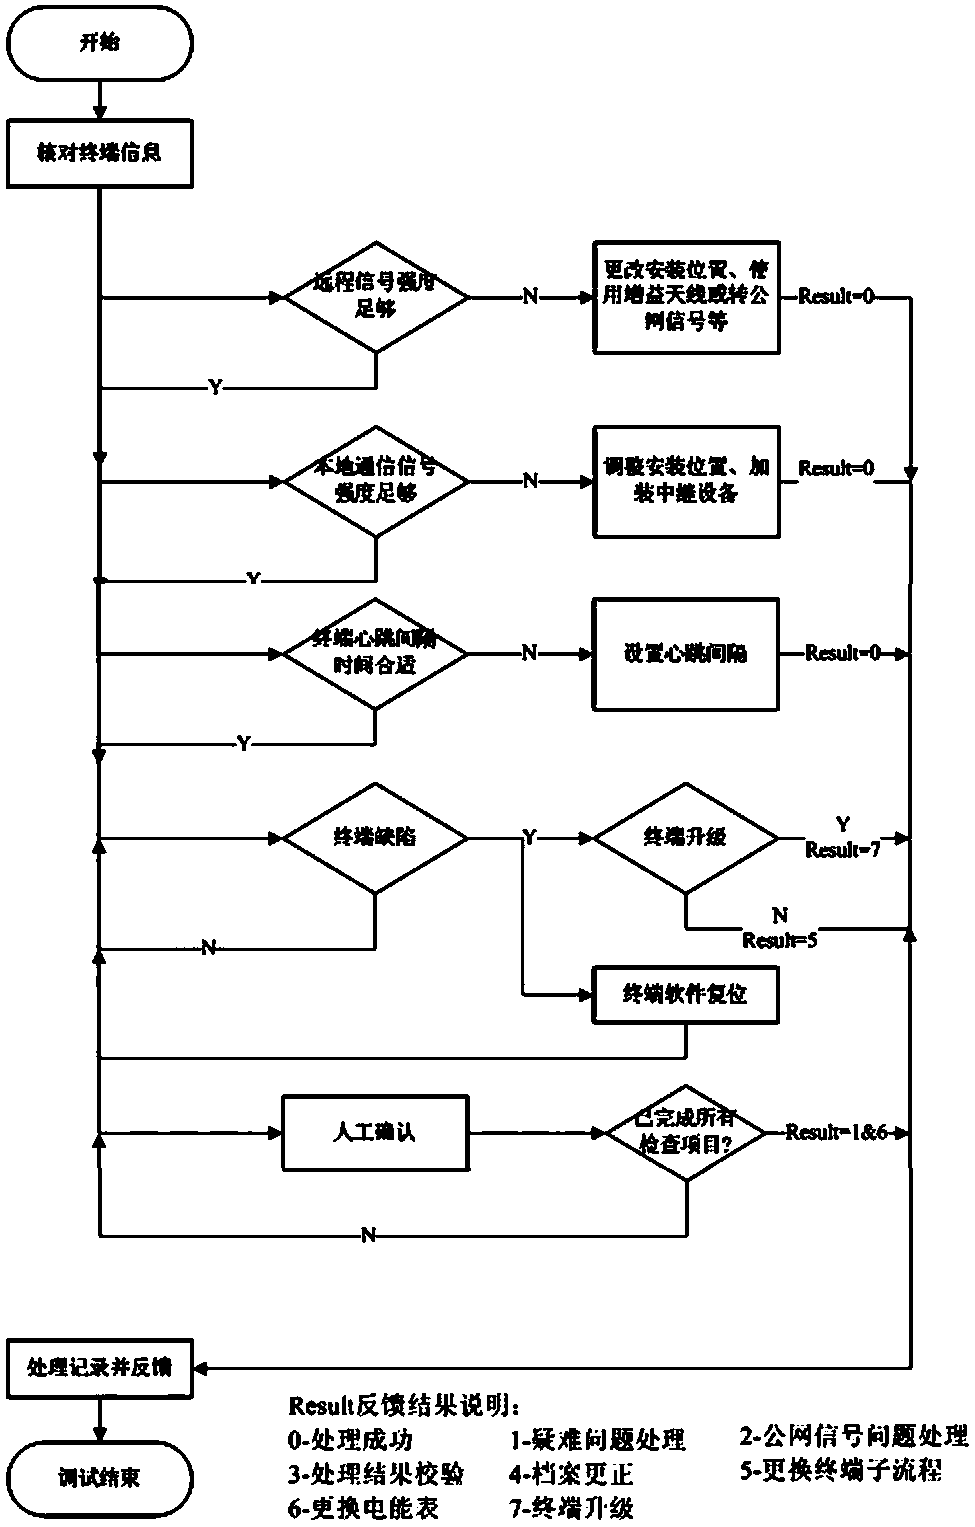 Field processing method for low defects of load data collection success rate